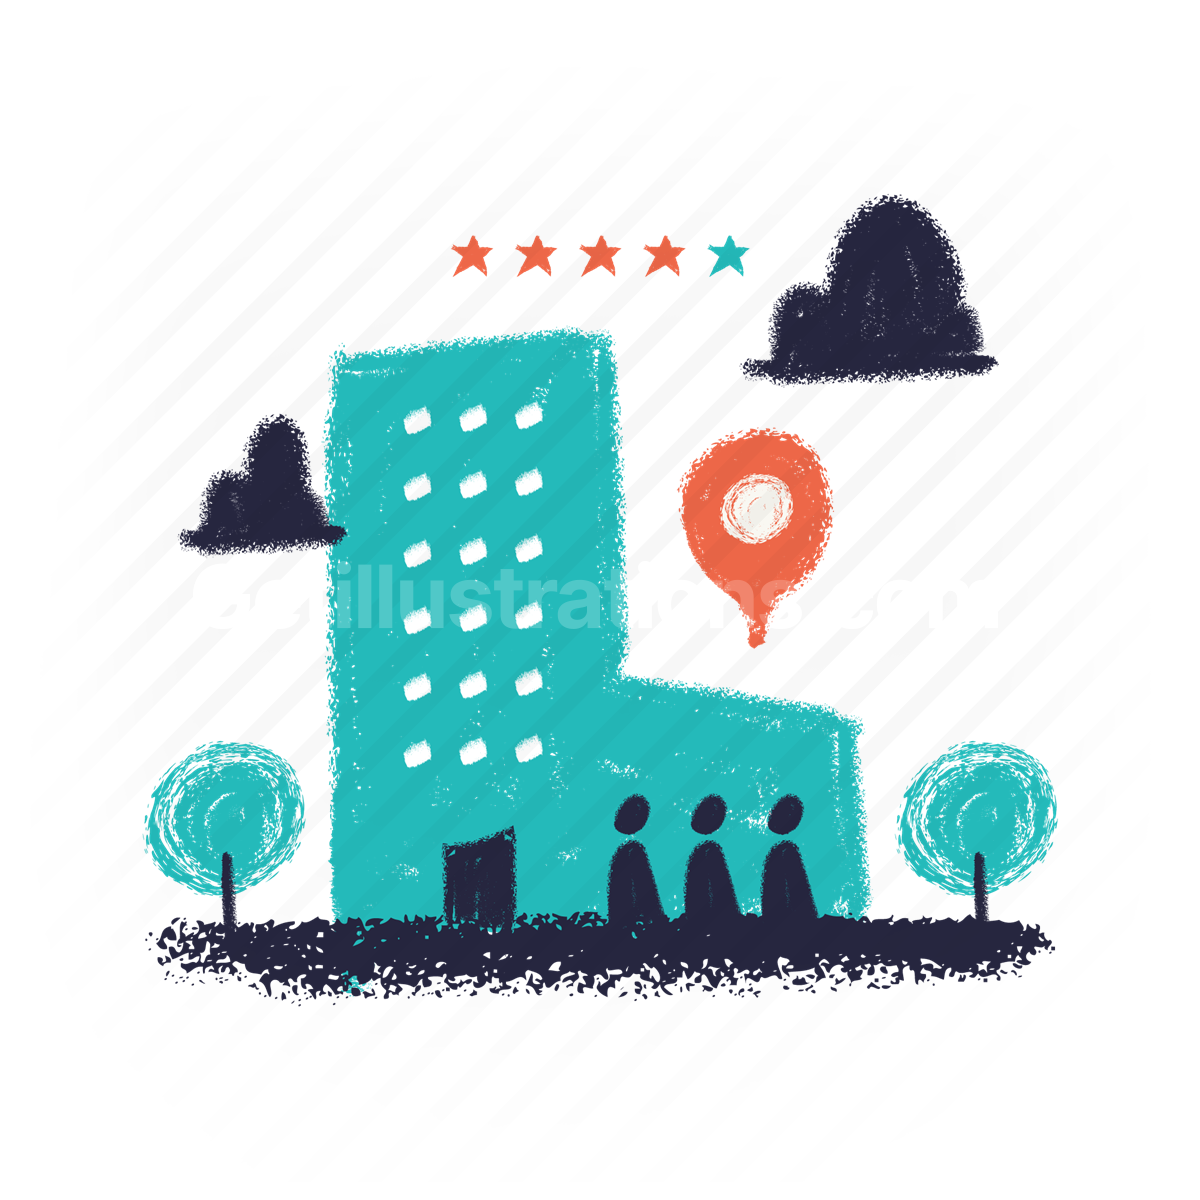 accommodation, location, pin, marker, review, ratings